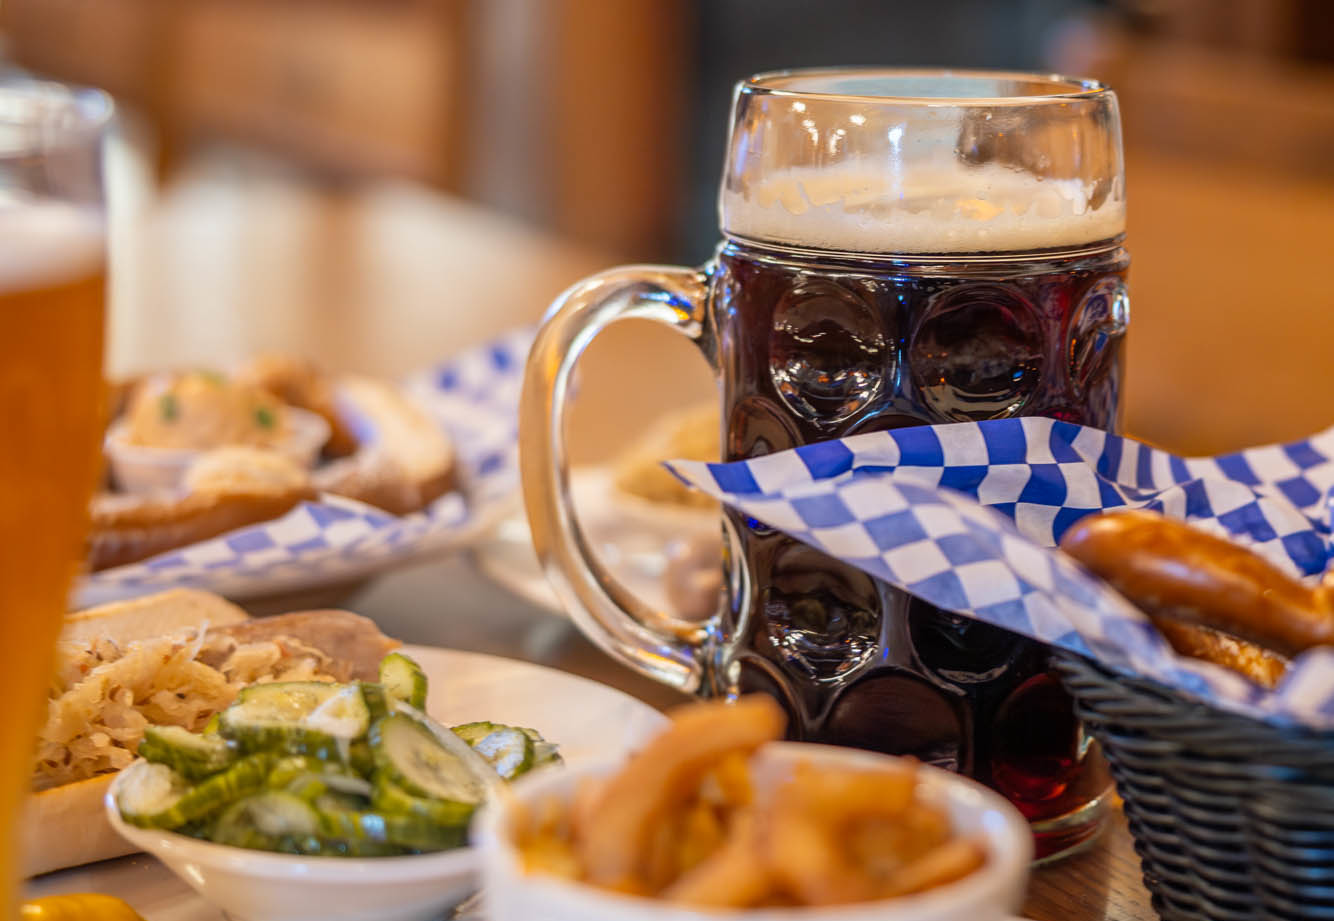 A table with a glass of beer, surrounded by food.